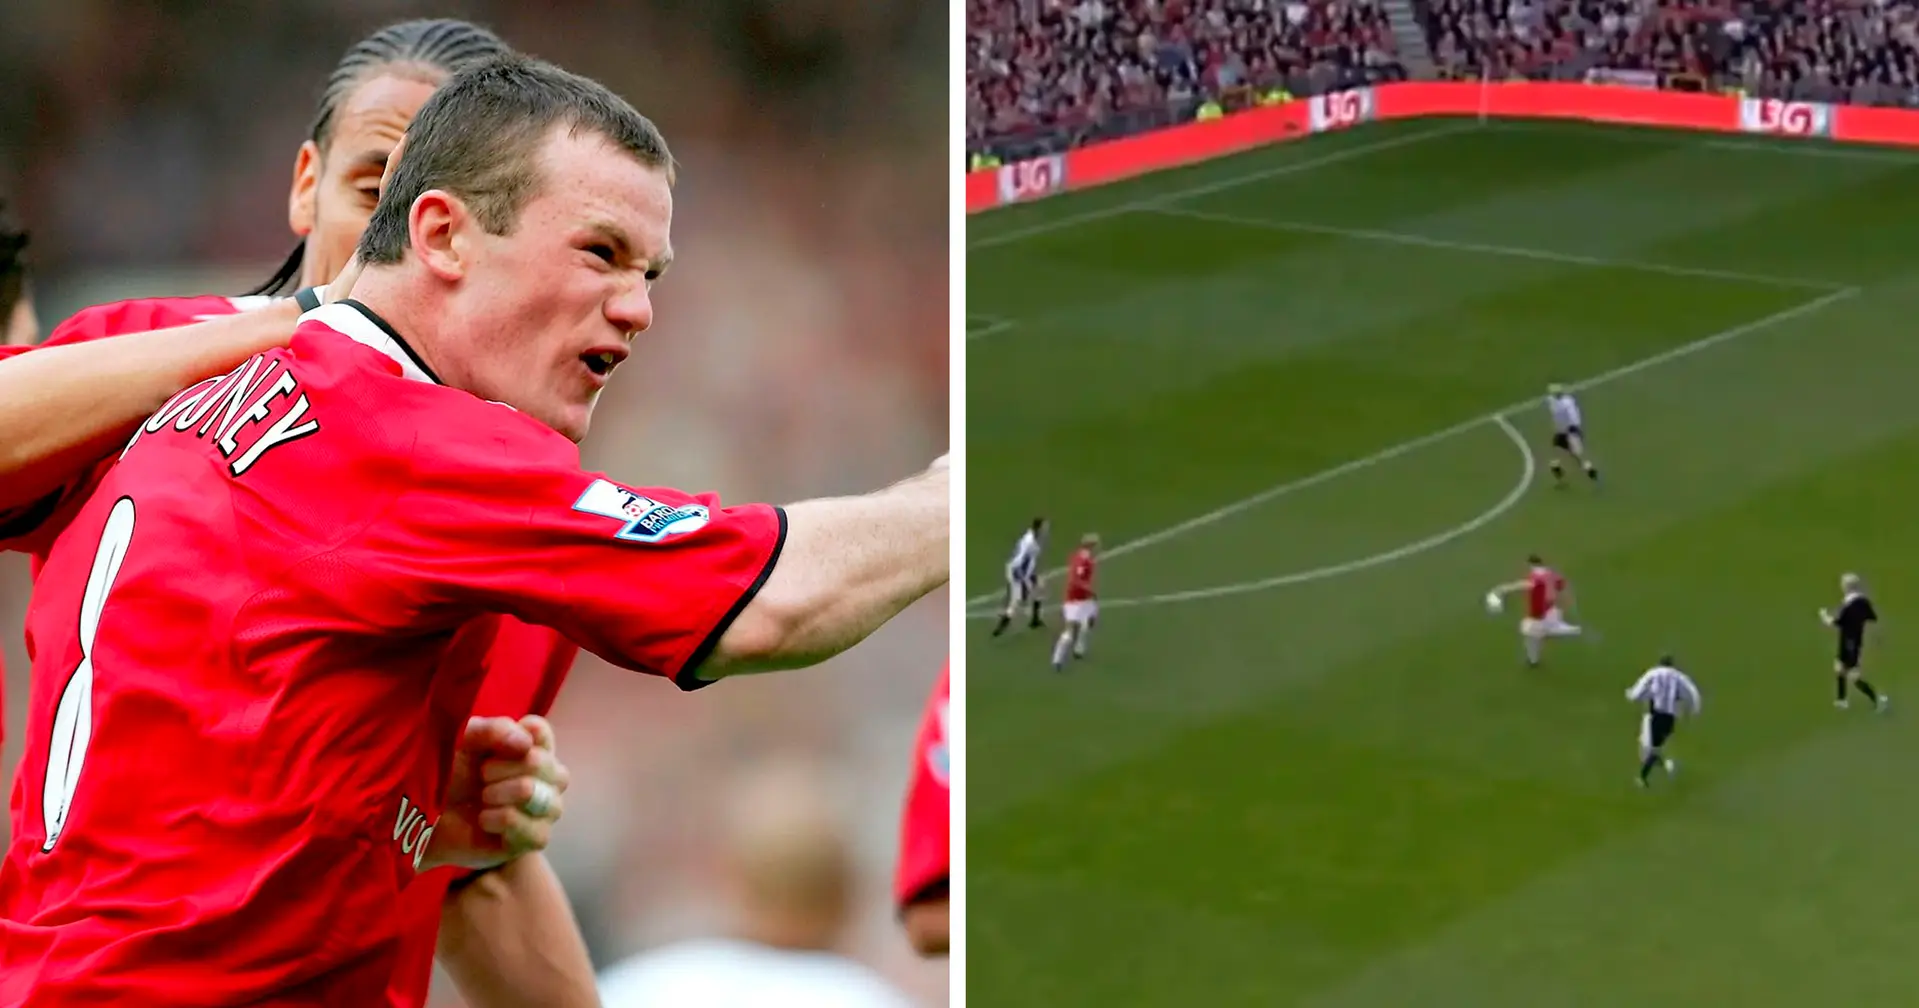 On this day, 19 years ago, an angry 20-year old Wayne Rooney scored THAT volley against Newcastle